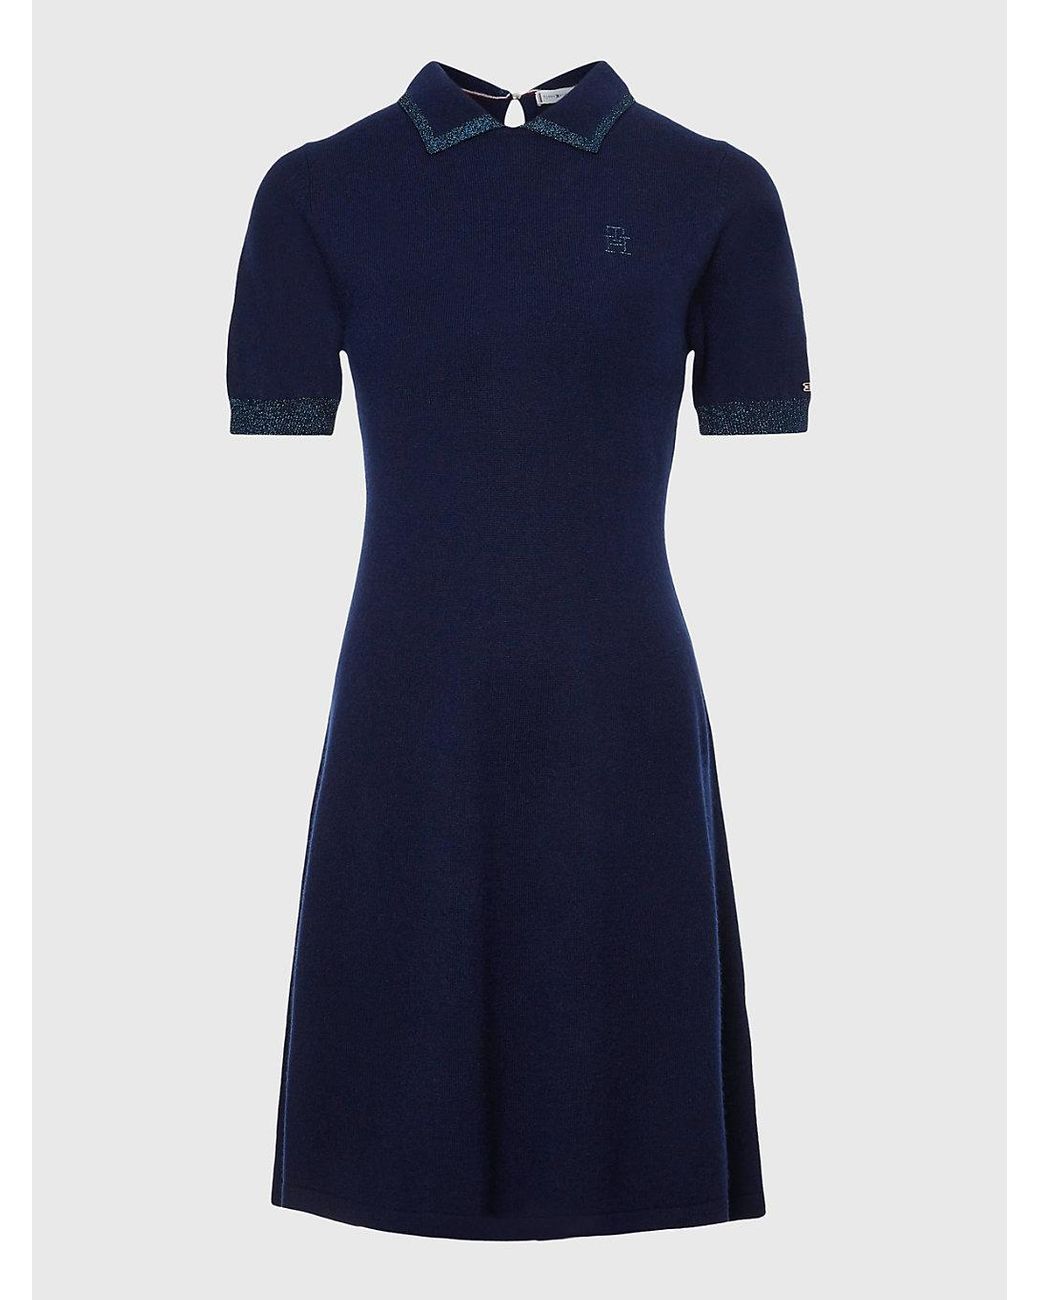 Tommy Hilfiger Wool Cashmere Slim Fit Polo Dress in Blue | Lyst UK